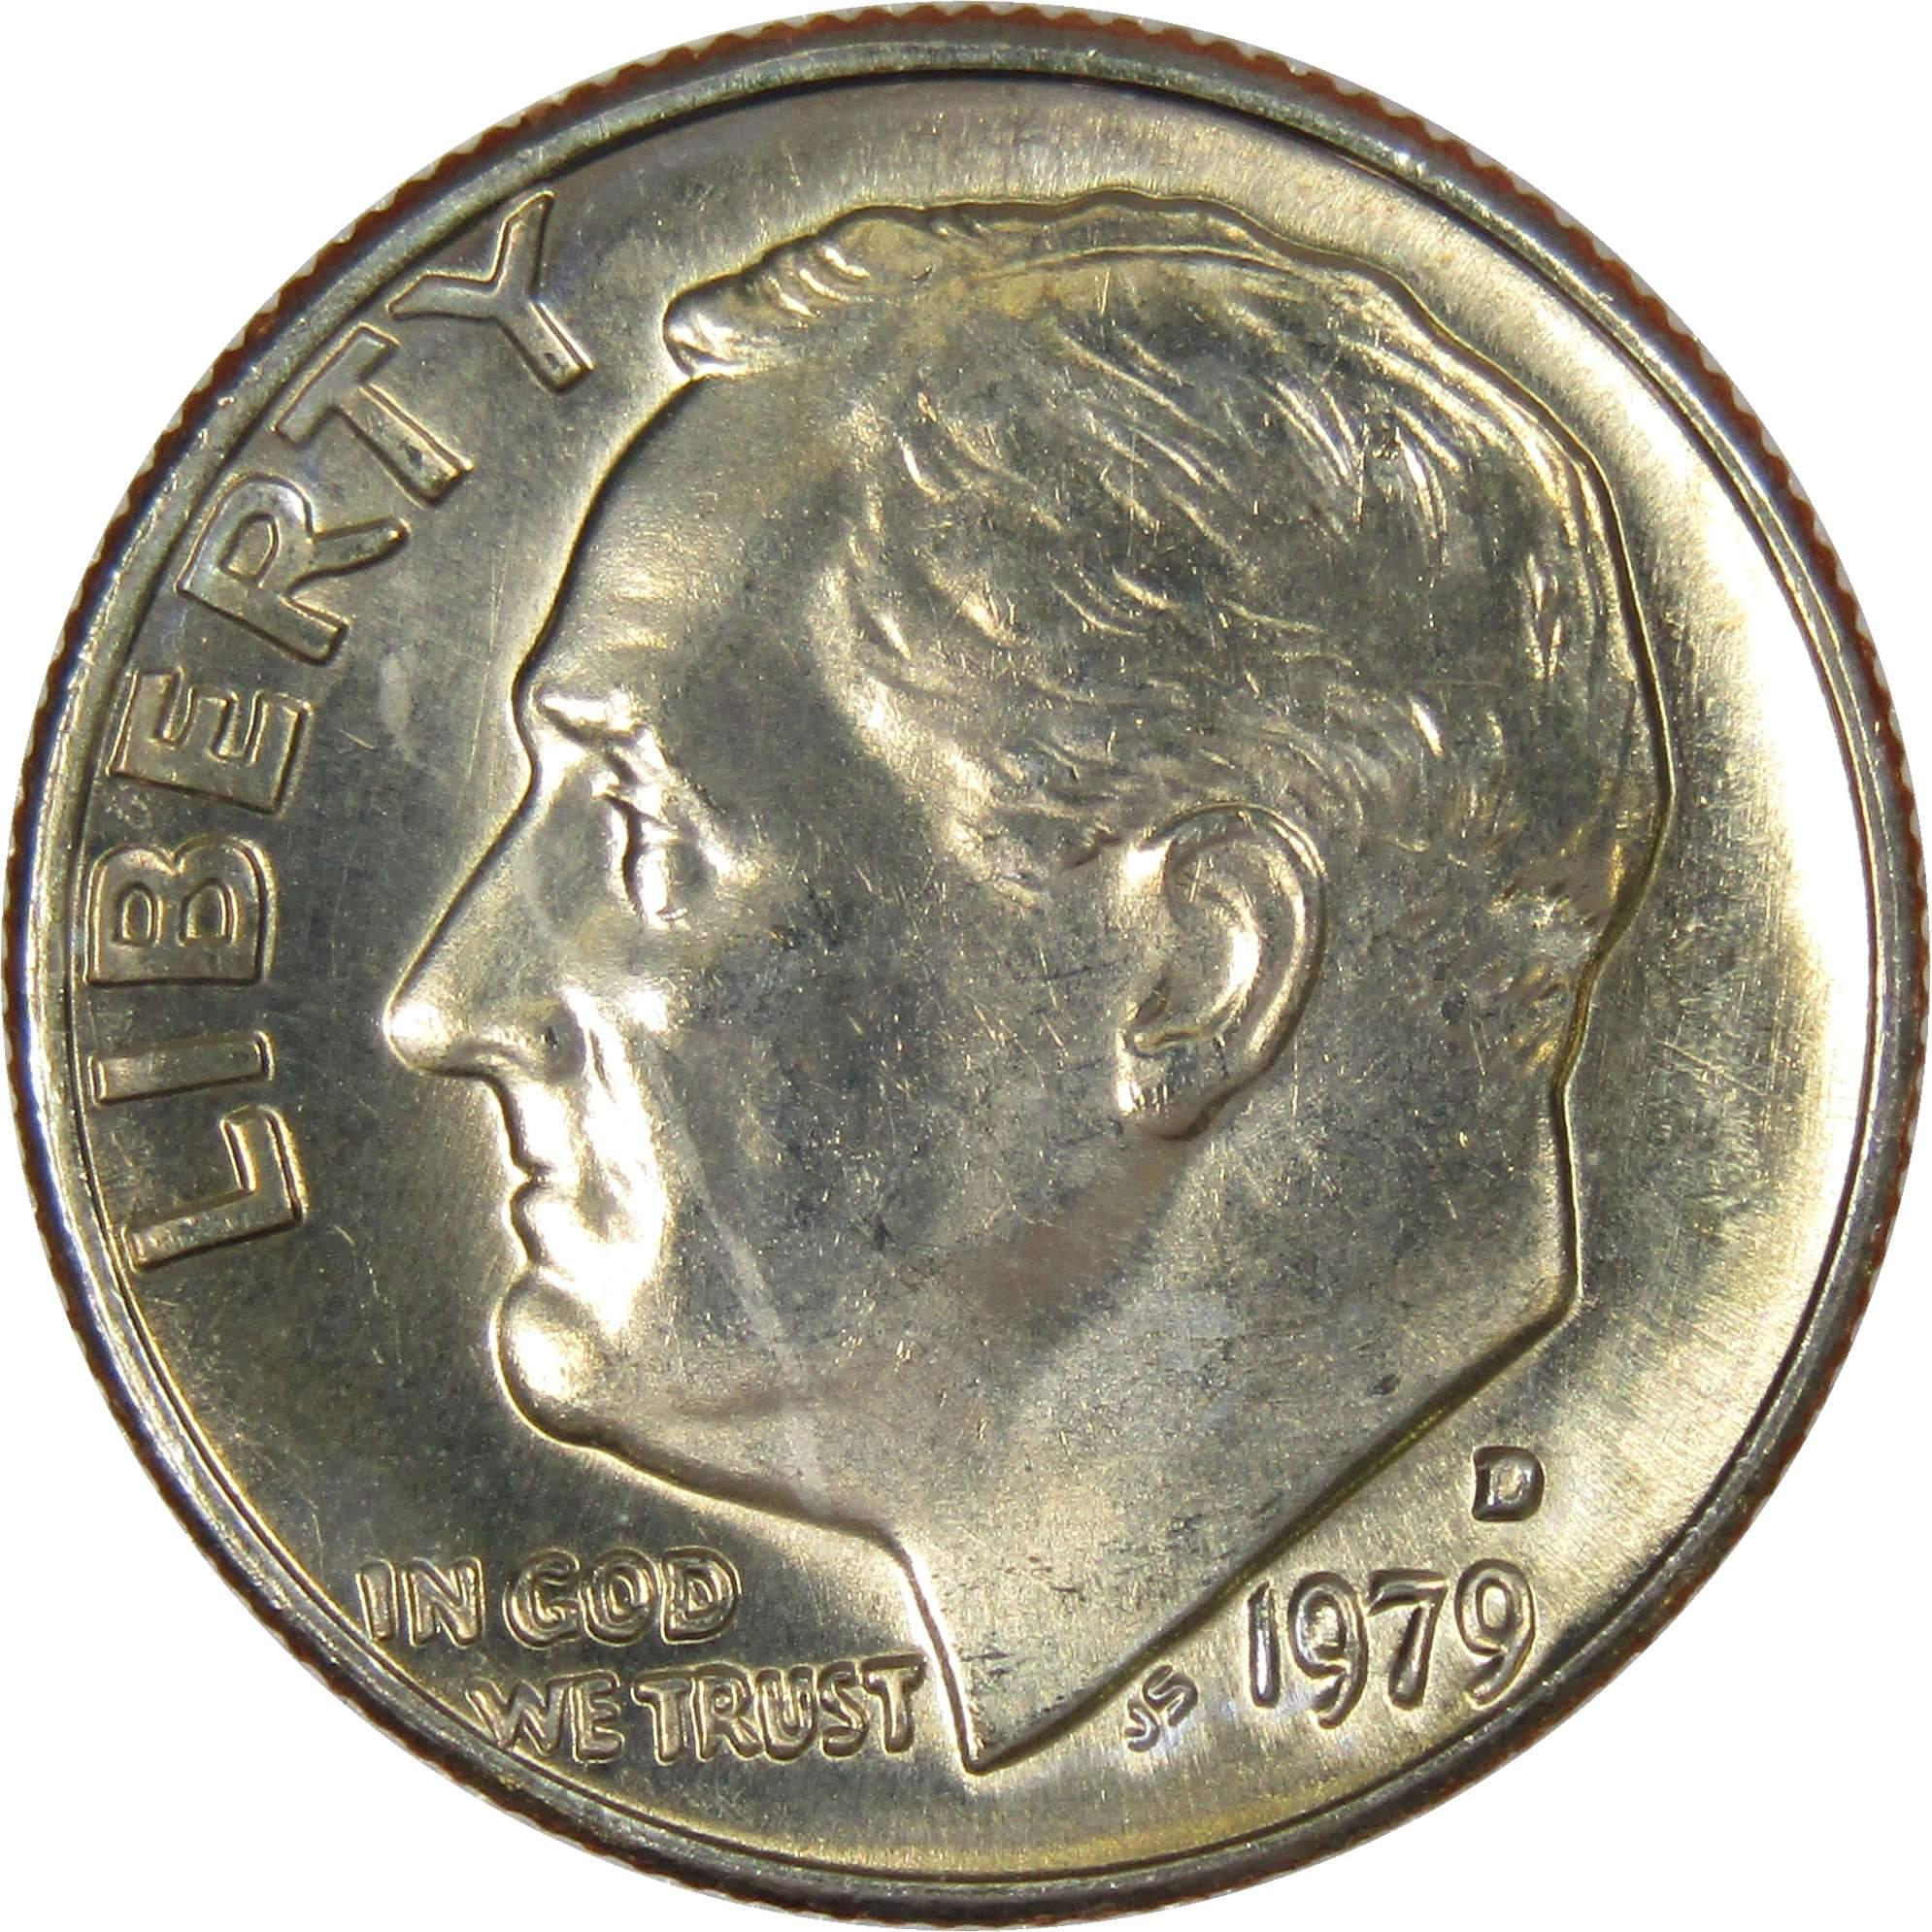 1979 D Roosevelt Dime BU Uncirculated Mint State 10c US Coin Collectible